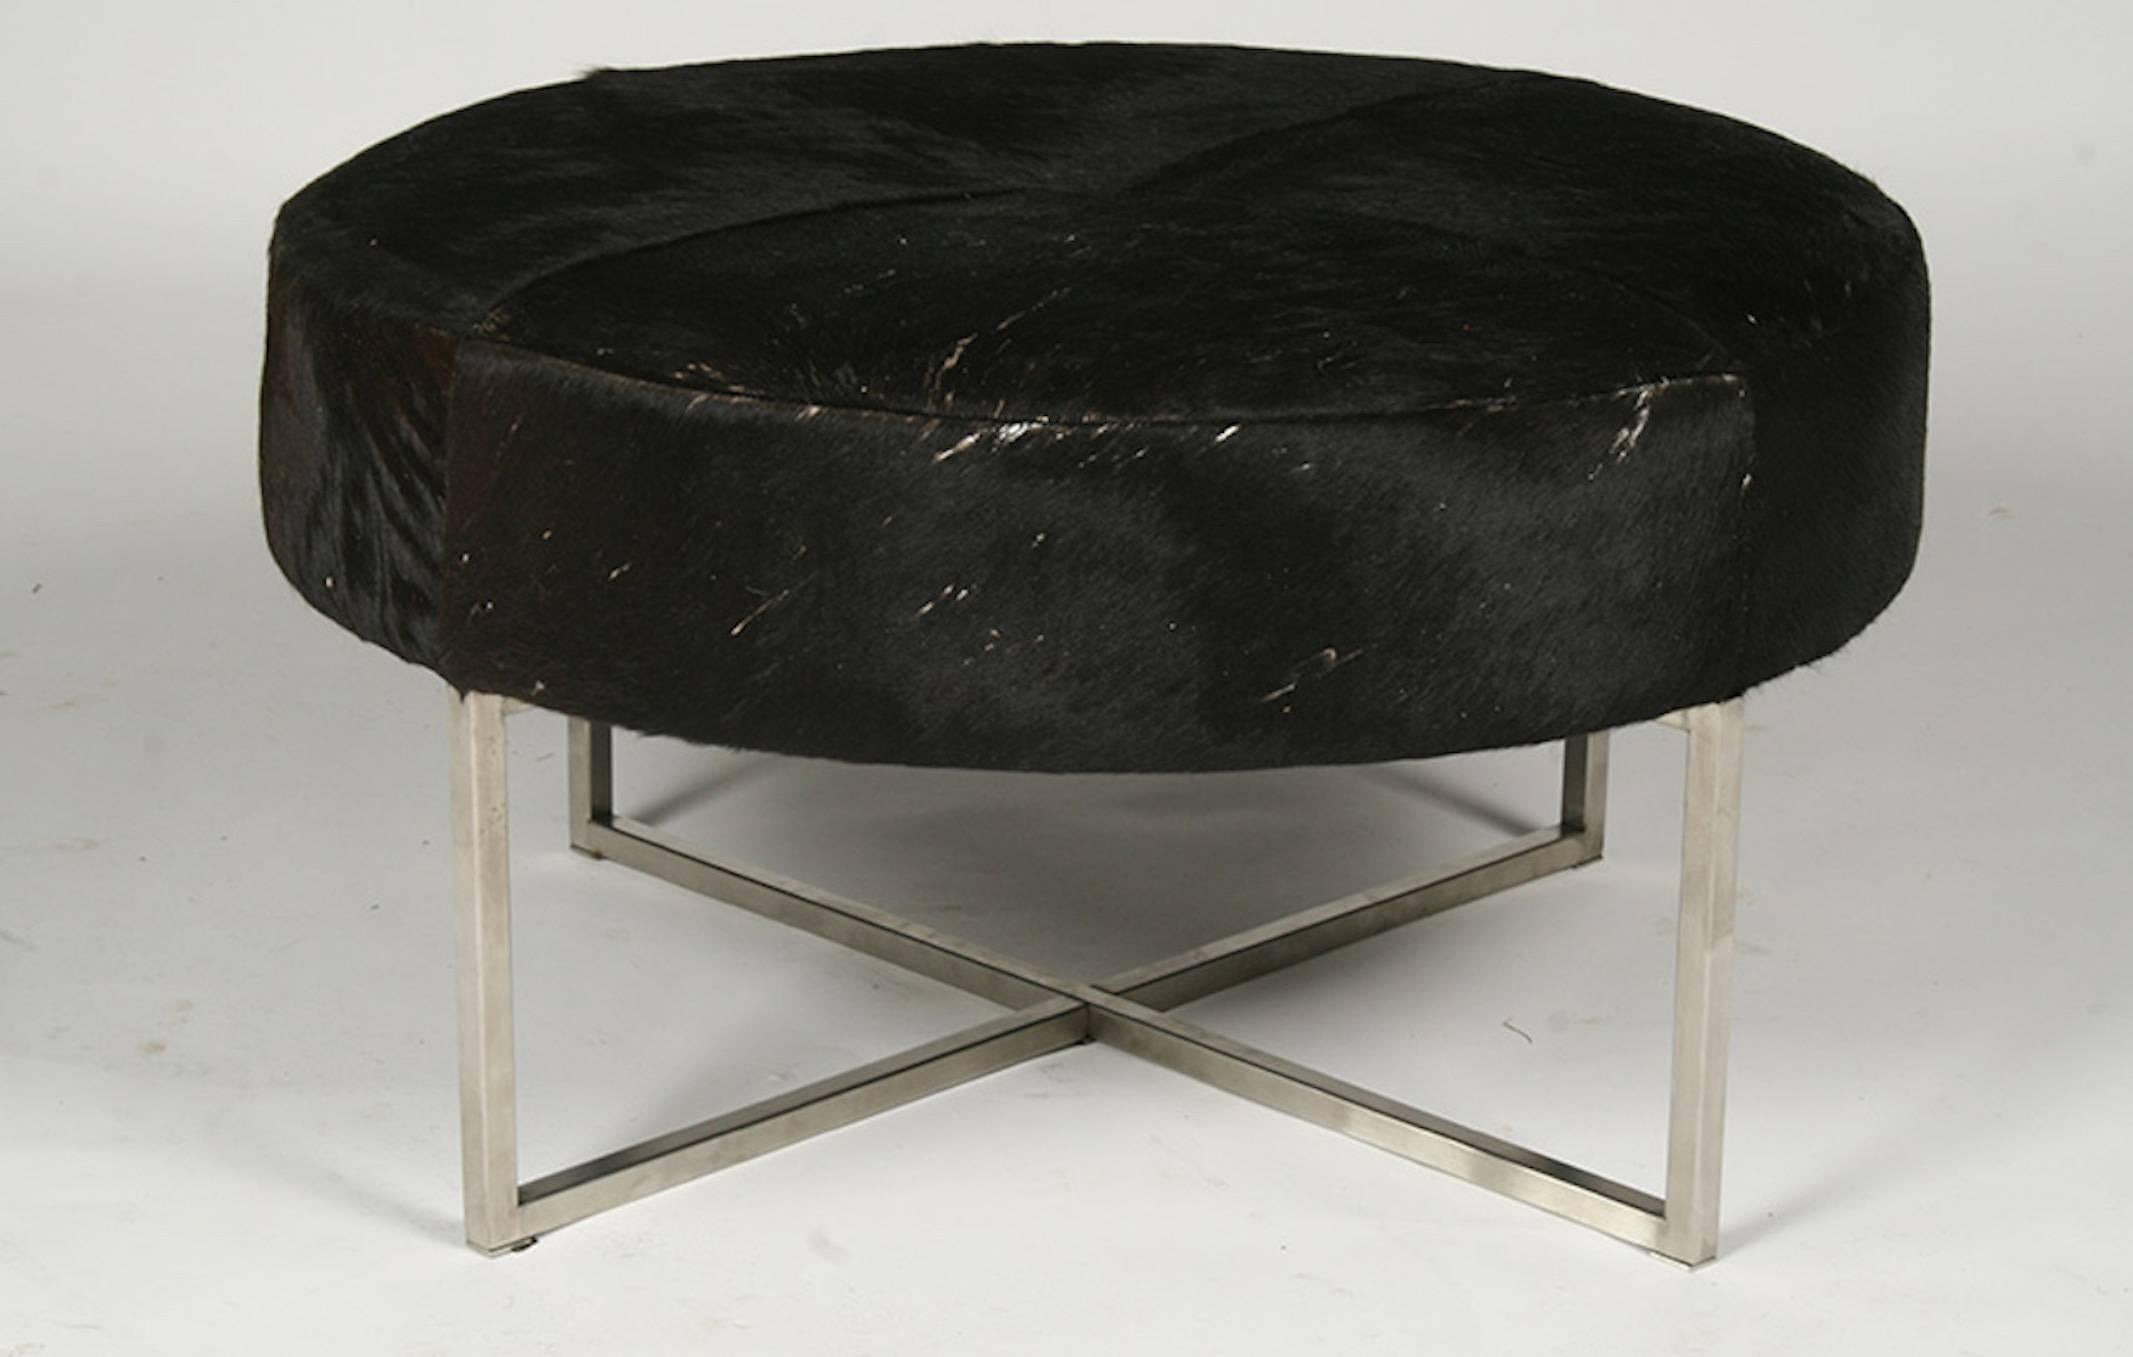 A Mid-Century Modern cow hide upholstered round bench or ottoman raised on a metal X-form base.